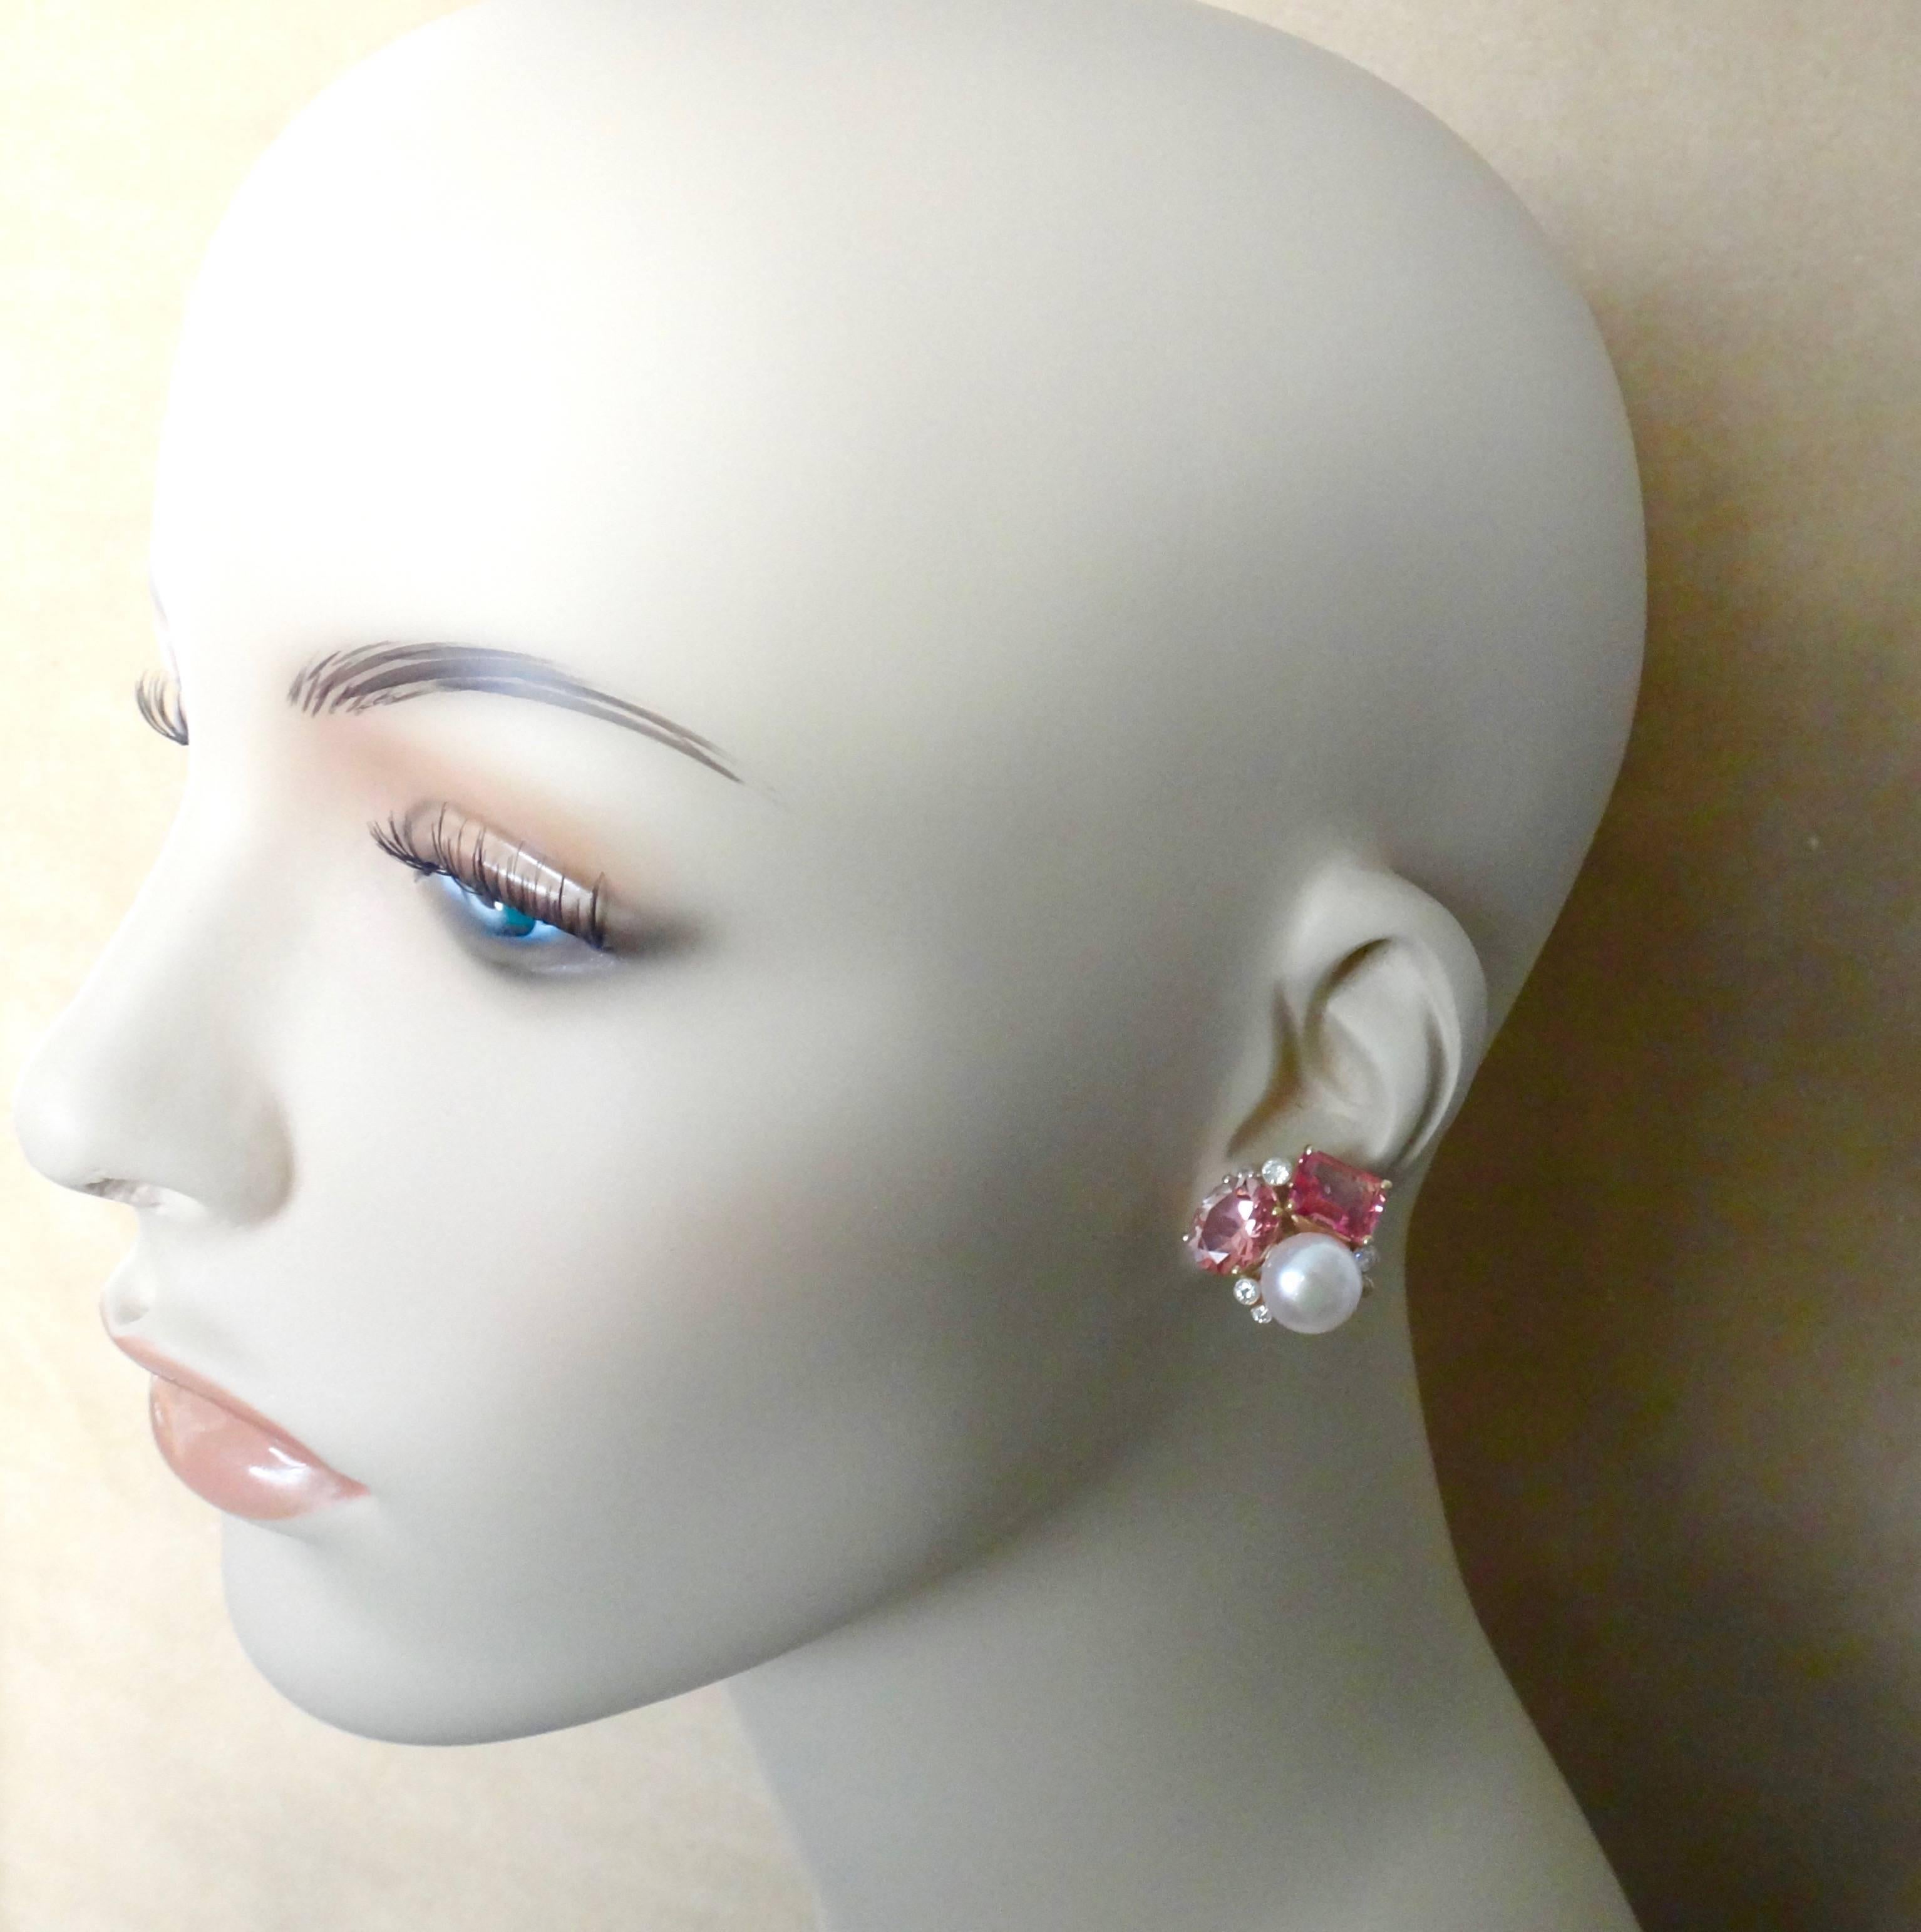 Emerald and oval cut pink topaz in two shades are paired with pink cultured pearls in these Confetti earrings.  The gems are further complimented with bezel set white diamonds.  The earrings have posts with omega clip backs for comfort and safety.  